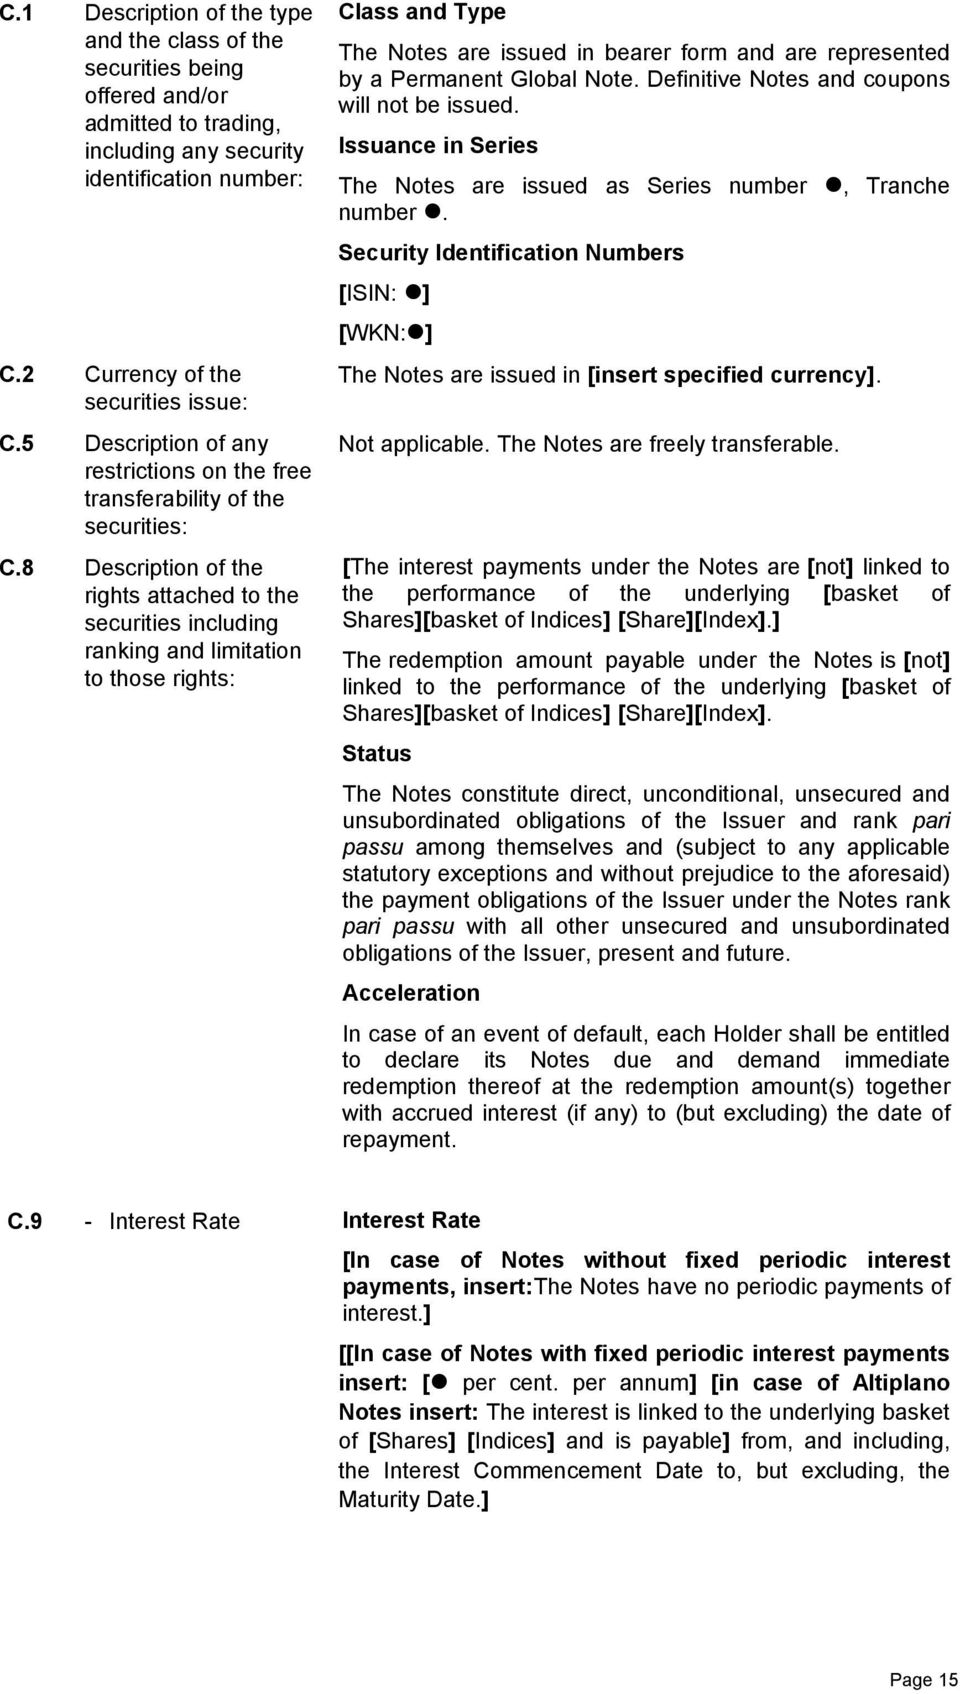 8 Description of the rights attached to the securities including ranking and limitation to those rights: Class and Type The Notes are issued in bearer form and are represented by a Permanent Global